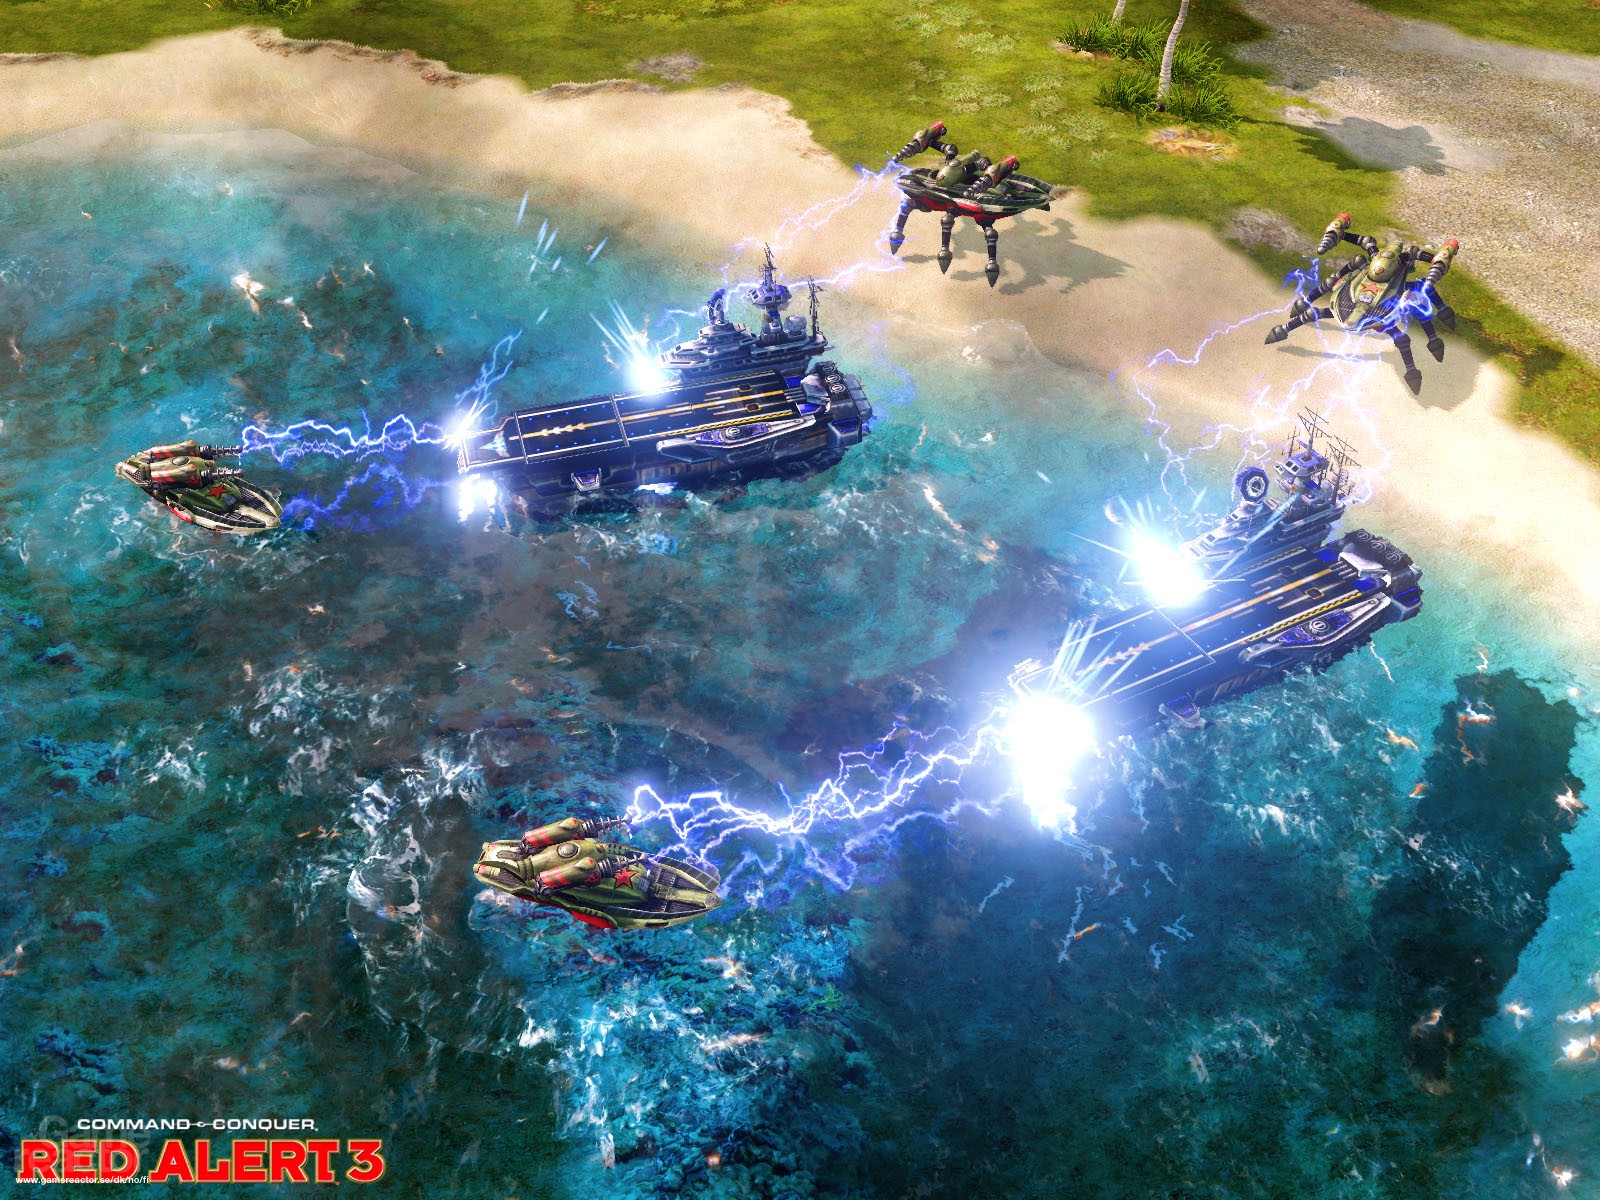 Red alert ps3. Command & Conquer: Red Alert. Red Alert 3. Игра на ps3 Red Alert 3. Command Conquer 3 Red Alert 3.